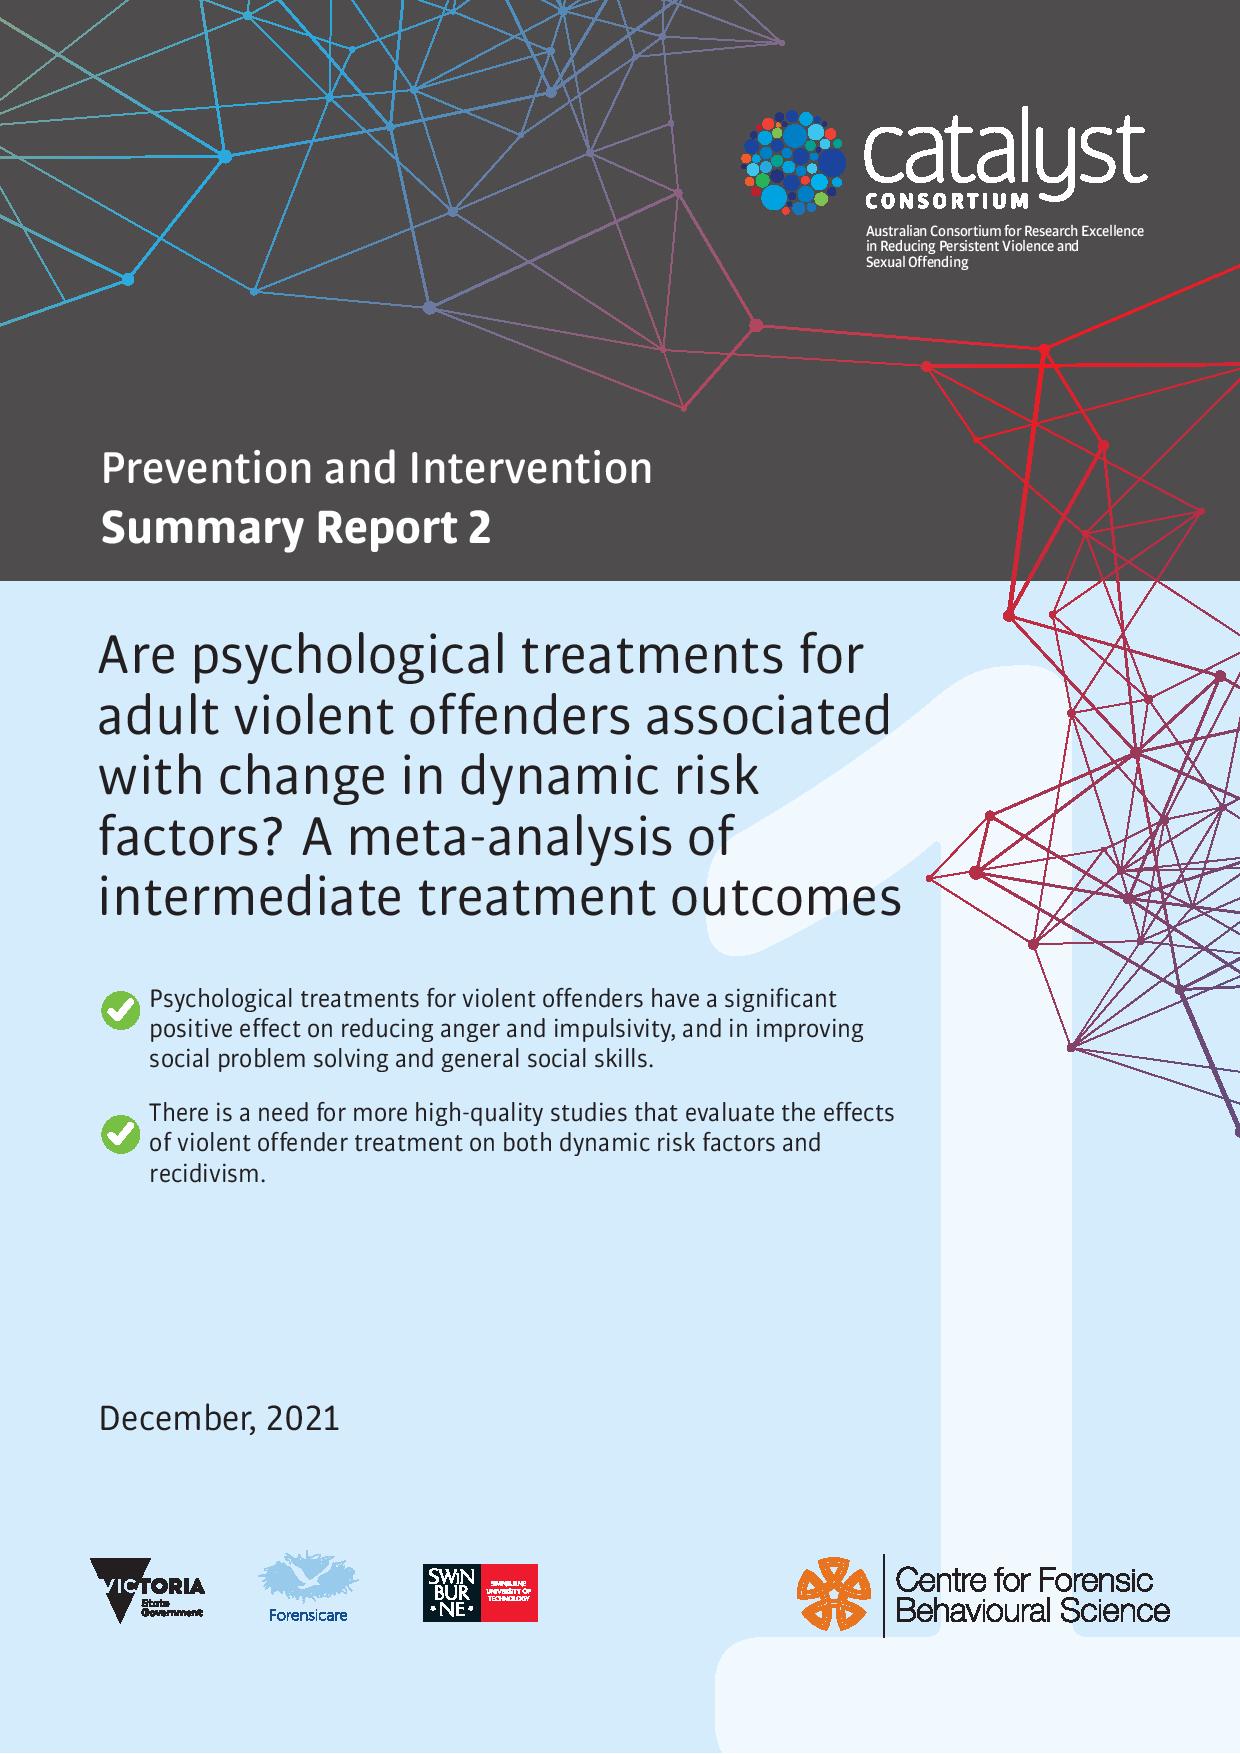 Are psychological treatments for adult violent offenders associated with change in dynamic risk factors? A meta-analysis of intermediate treatment outcomes